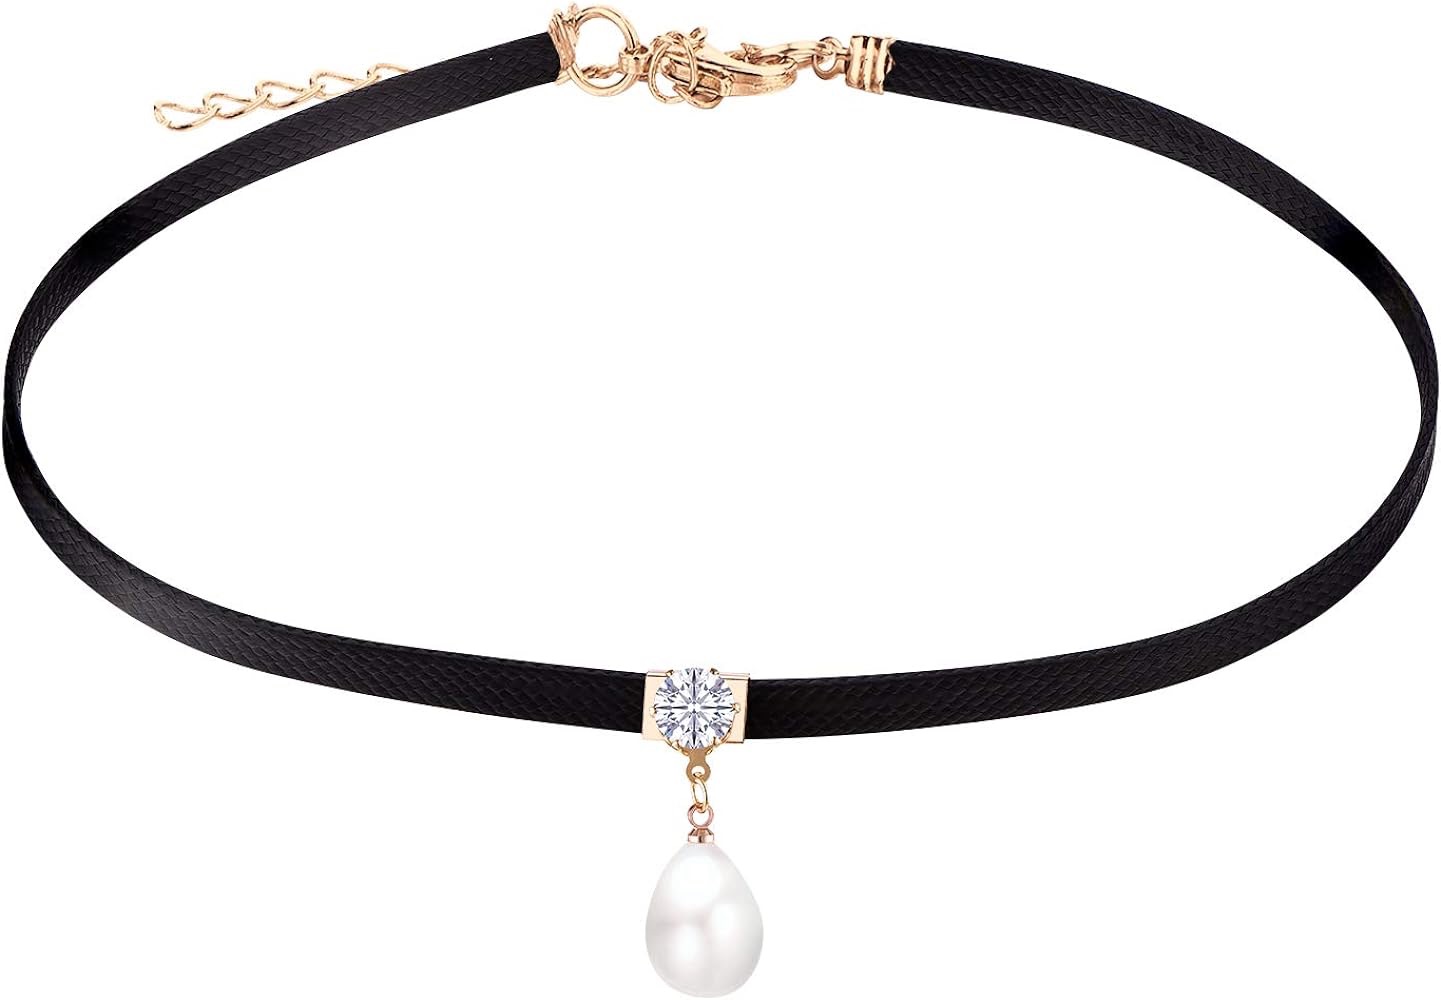 Amazon.com: FJ Black Pearl Choker Necklace for Women: Clothing, Shoes & Jewelry